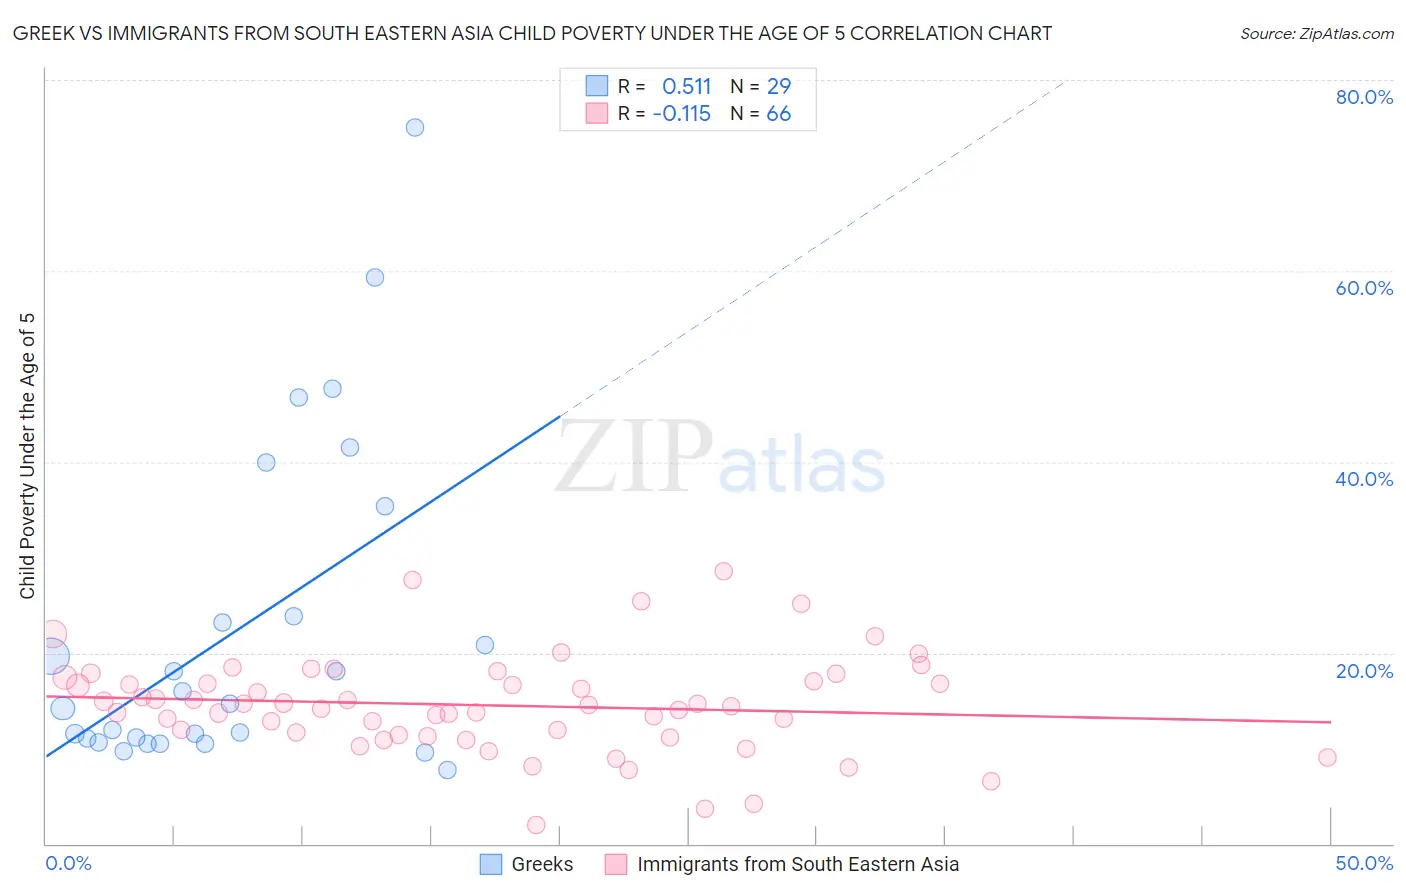 Greek vs Immigrants from South Eastern Asia Child Poverty Under the Age of 5